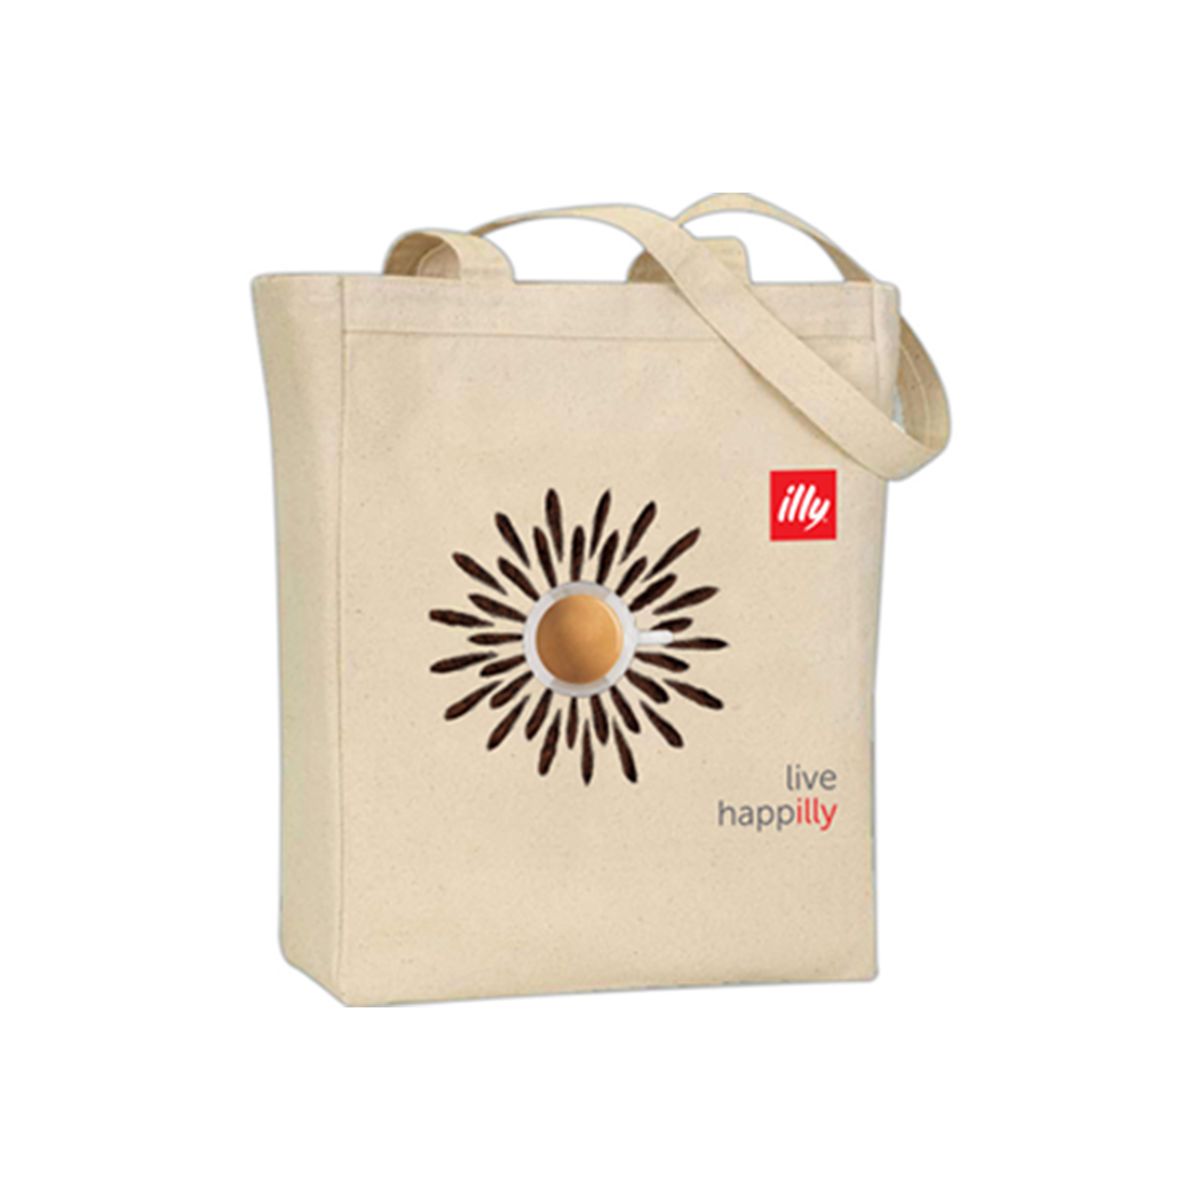 illy illy Branded Tote Bag